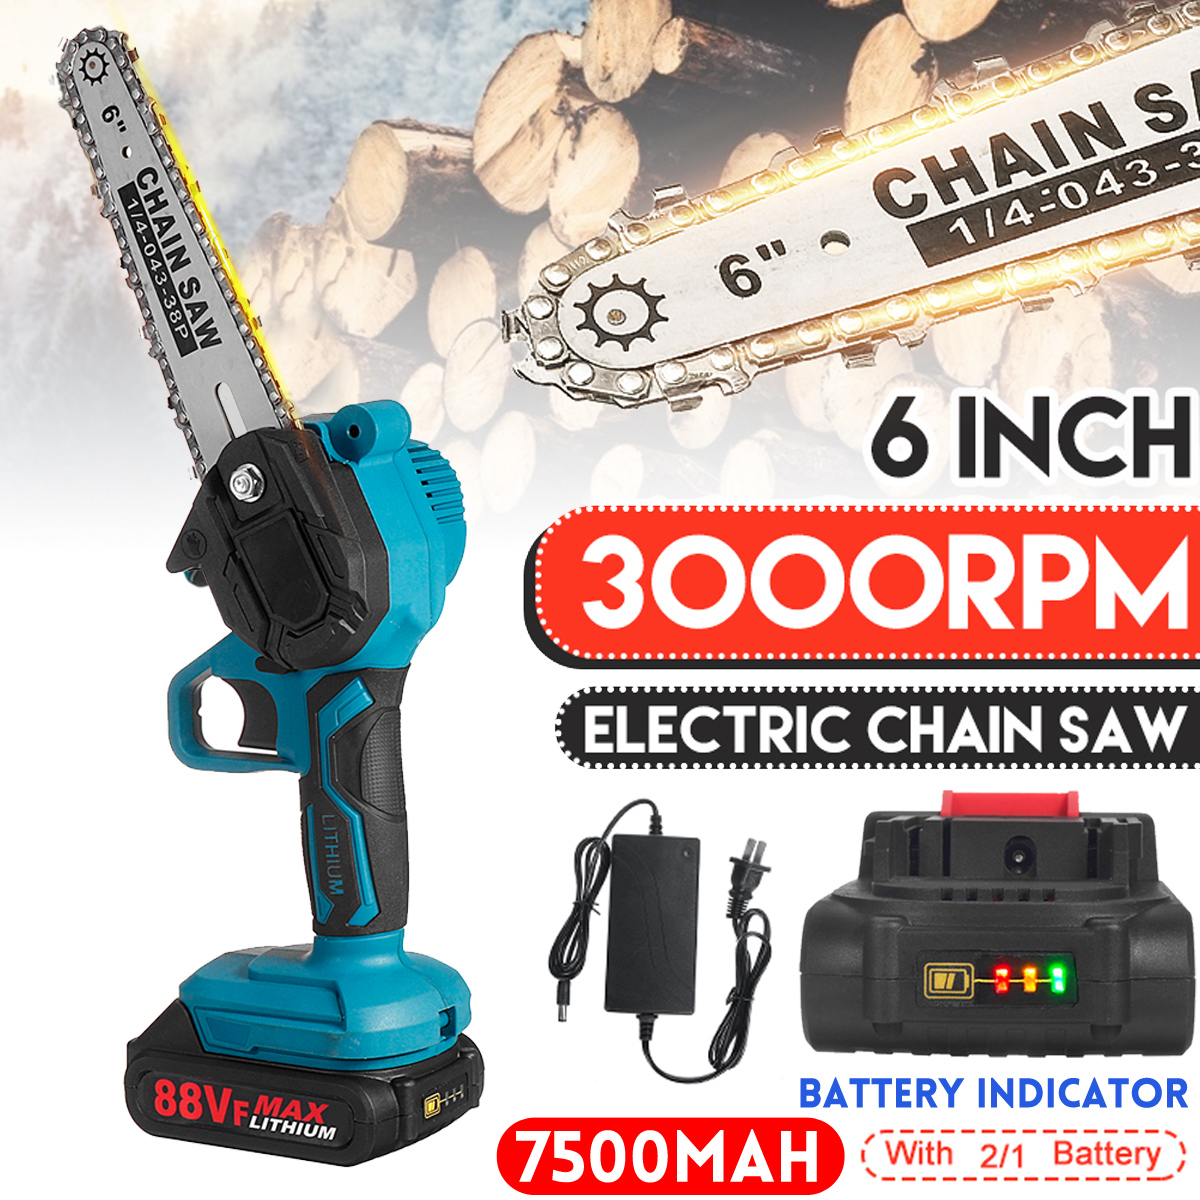 Drillpro-88VF-7500mAh-6in-Cordless-Electric-Chain-Saw-Battery-Indicator-Wood-Cutter-One-Hand-Saw-Woo-1868437-2